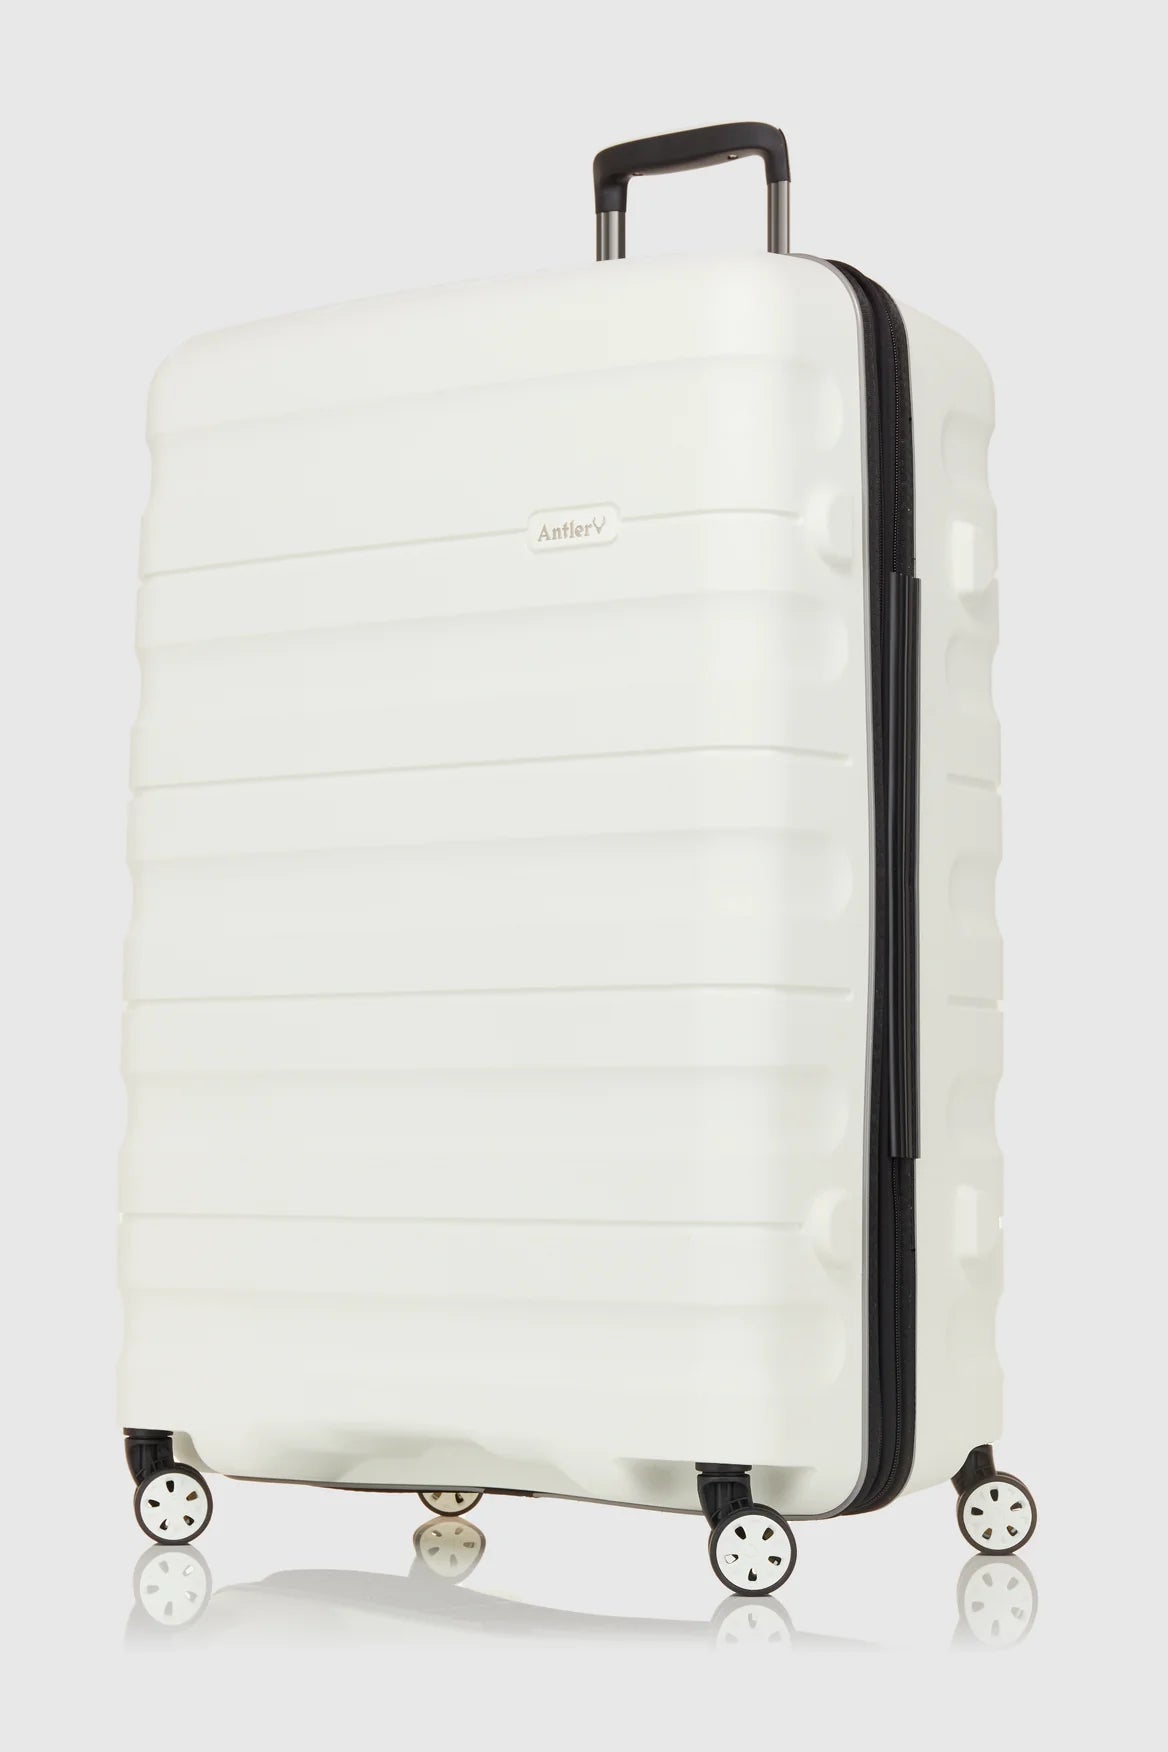 Antler Lincoln 56cm Carry On Hardsided Luggage - White